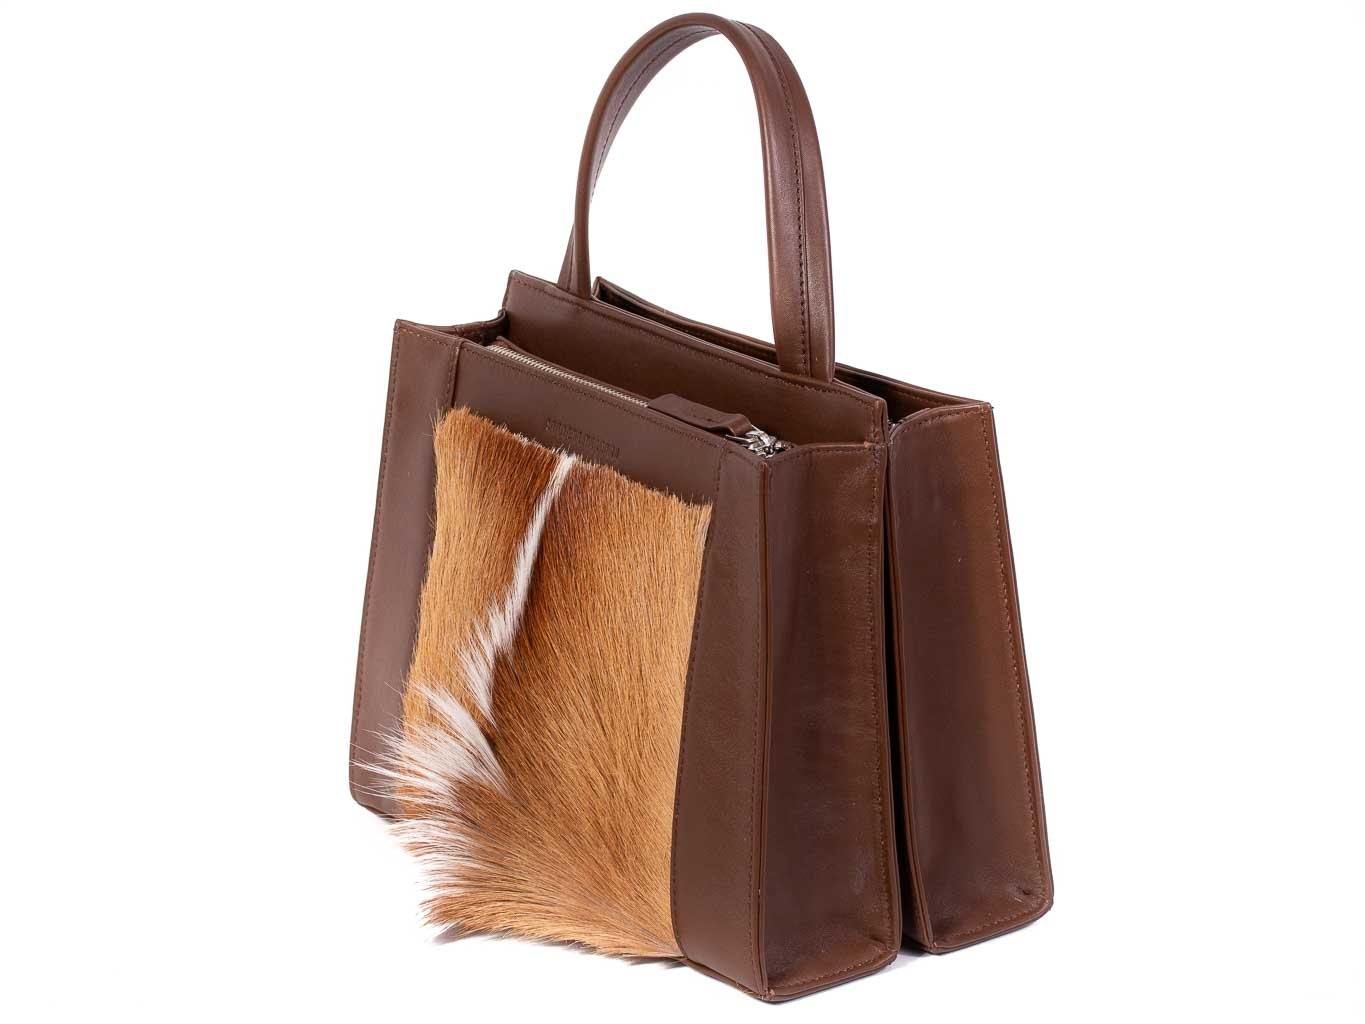 Top Handle Springbok Handbag in Cocoa Brown with a fan feature by Sherene Melinda side angle